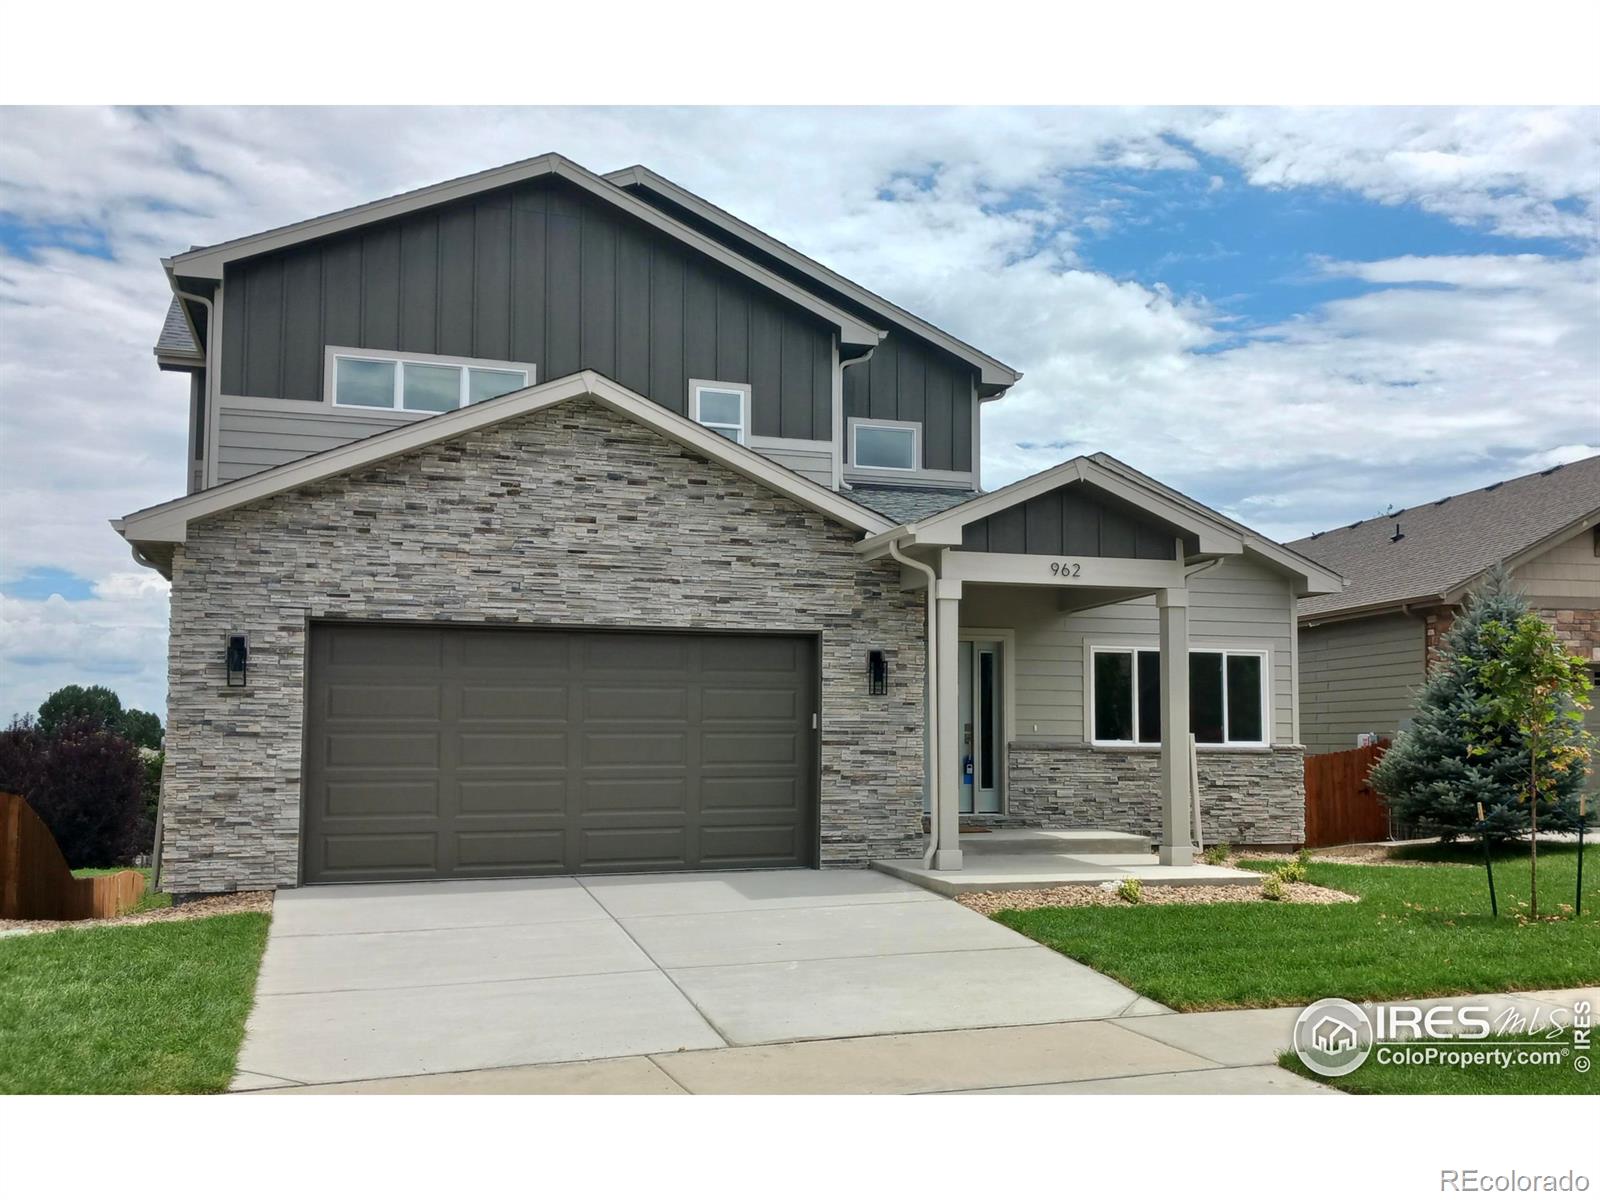 962  Campfire Drive, fort collins MLS: 123456789990131 Beds: 3 Baths: 3 Price: $685,000